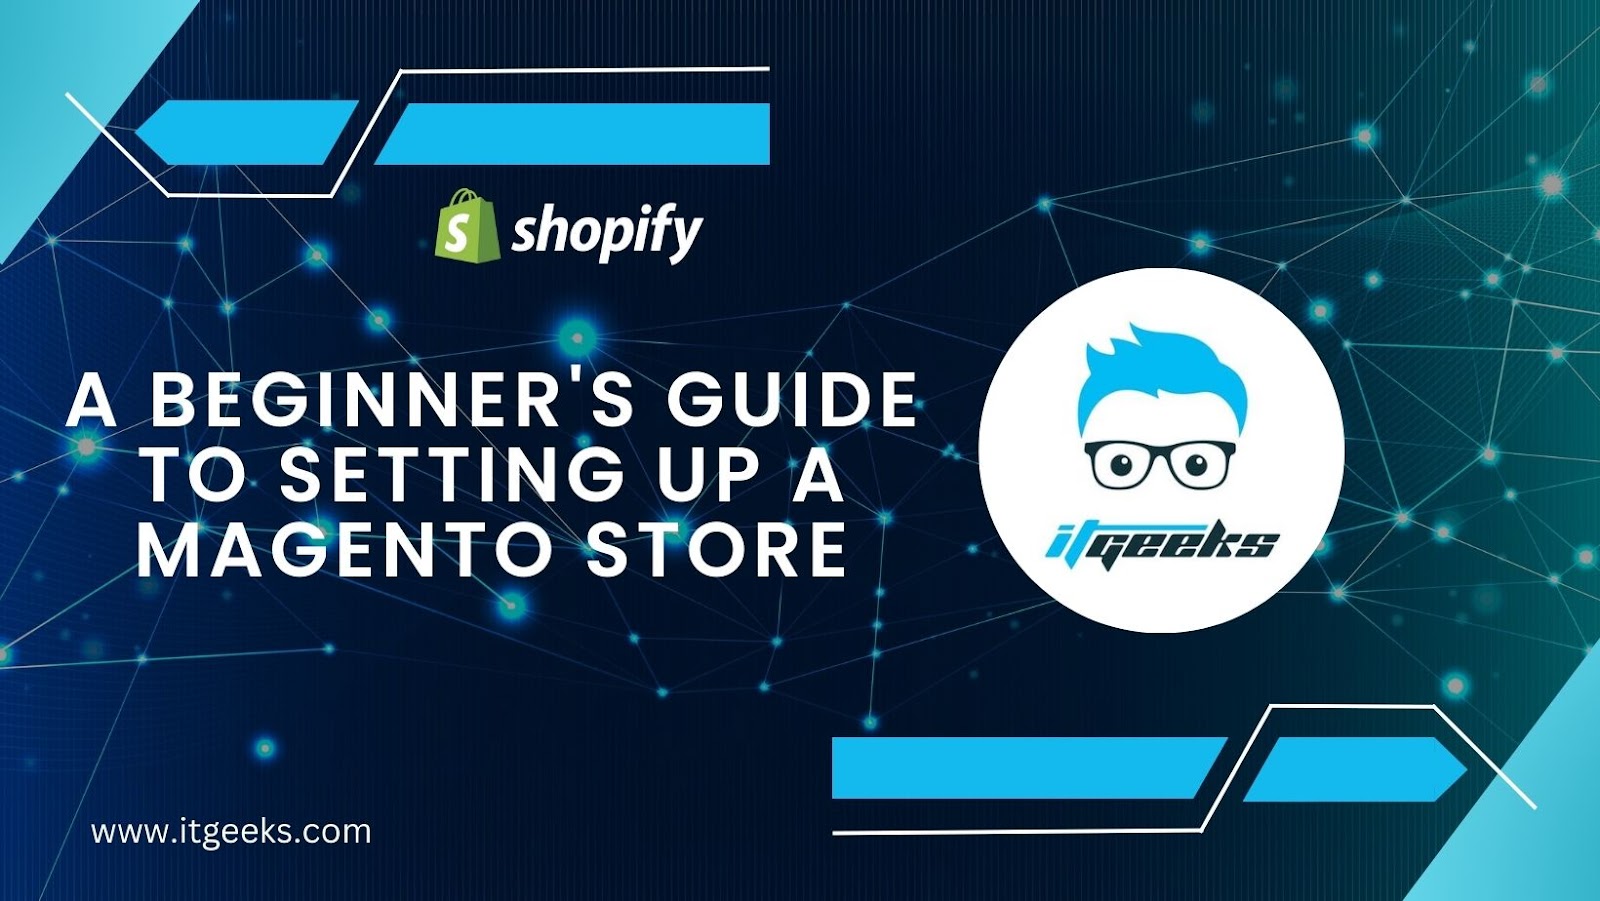 A Beginner’s Guide to Setting Up a Magento Store